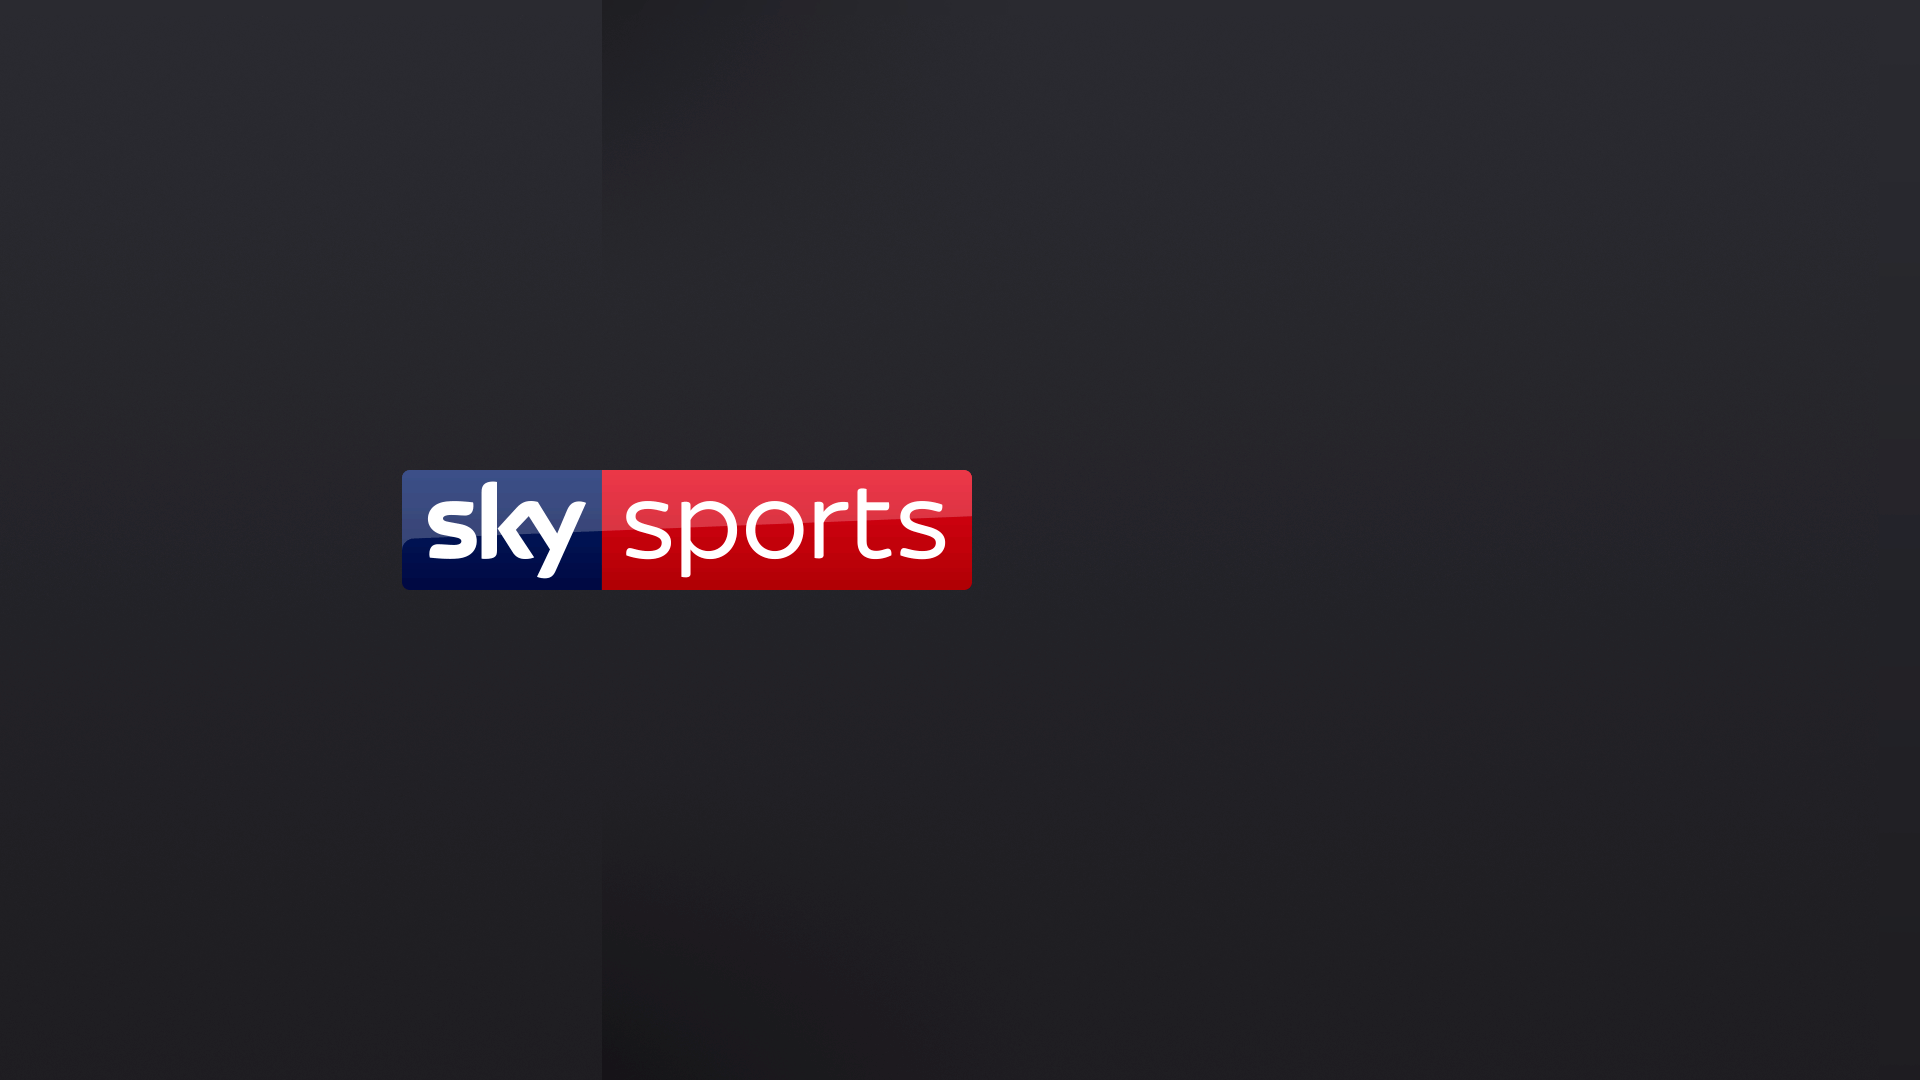 Sky Sports Revamps the Look With a New Logo and Theme